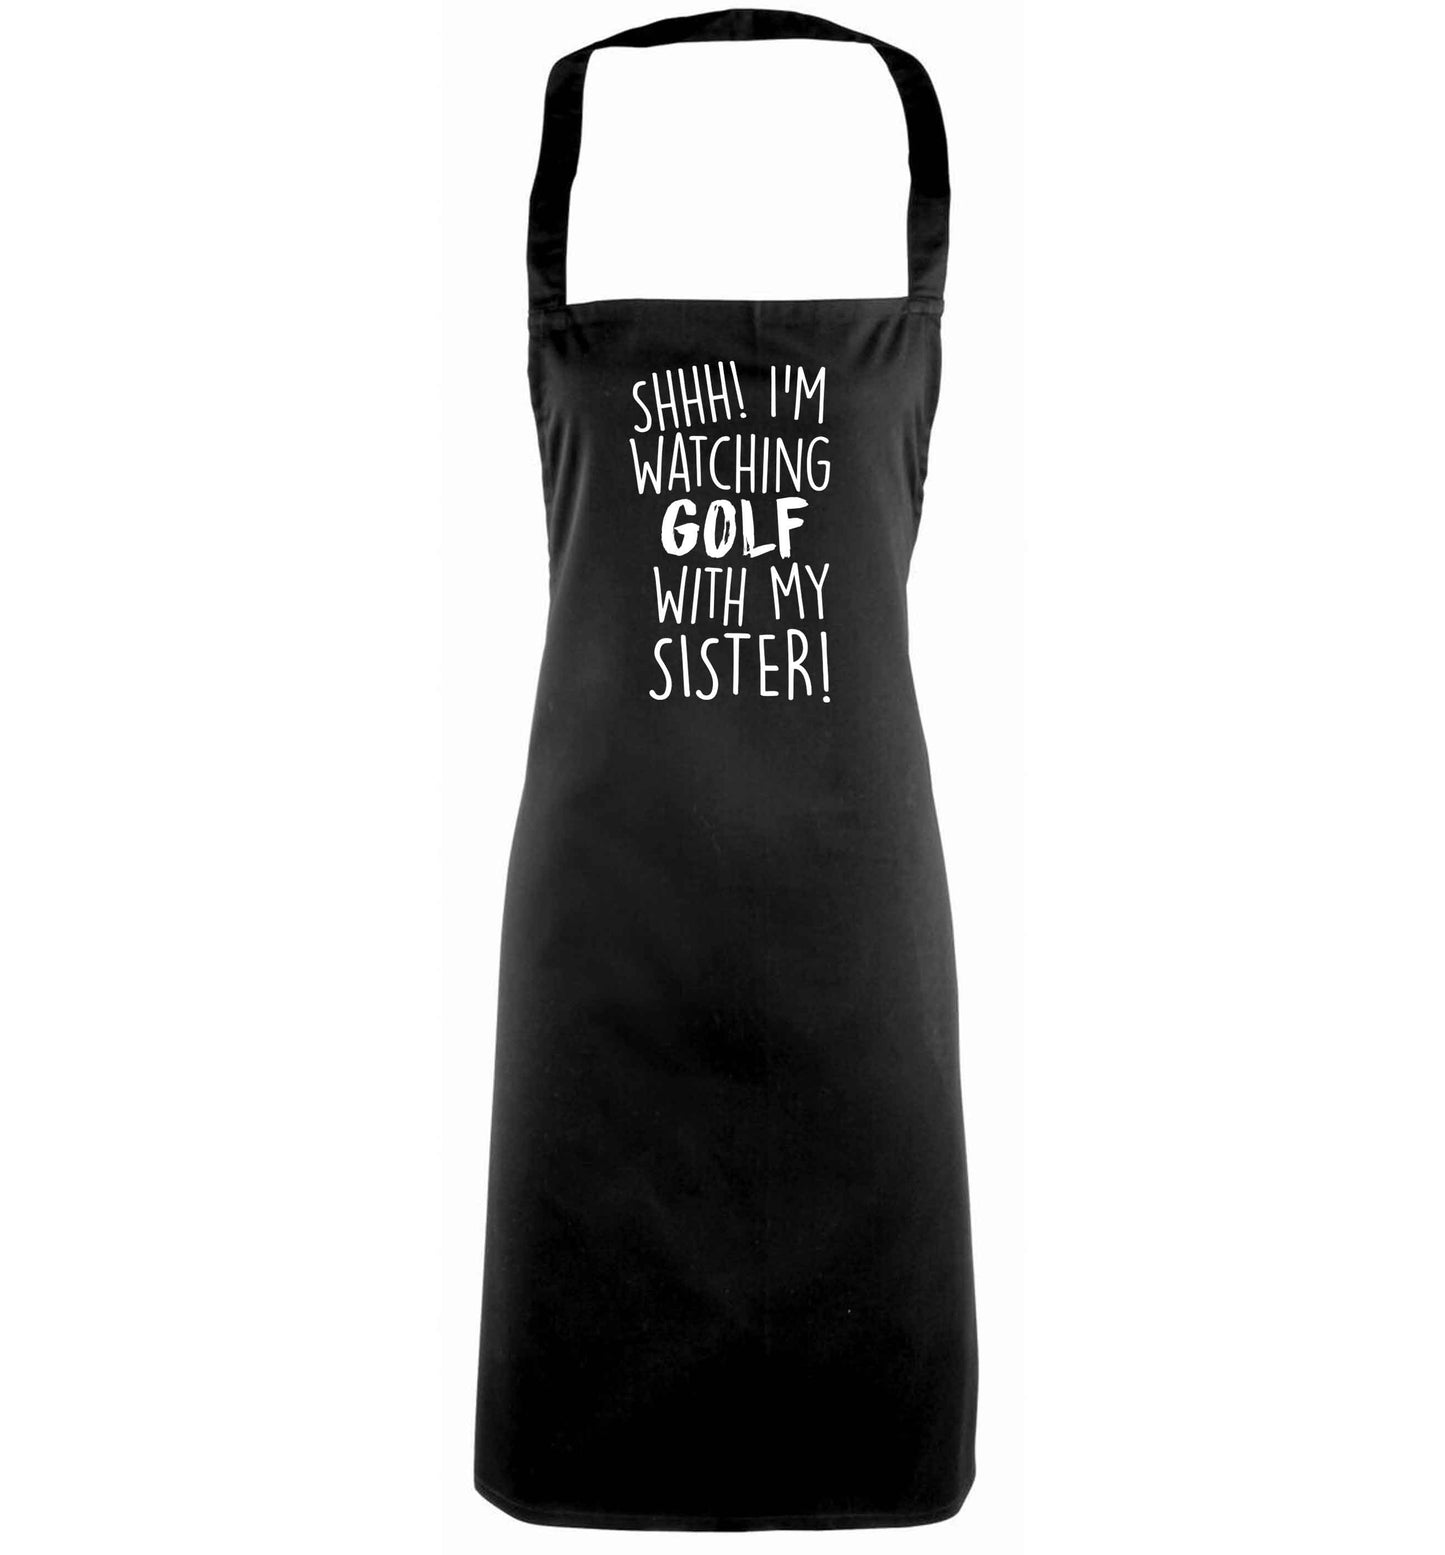 Shh I'm watching golf with my sister black apron